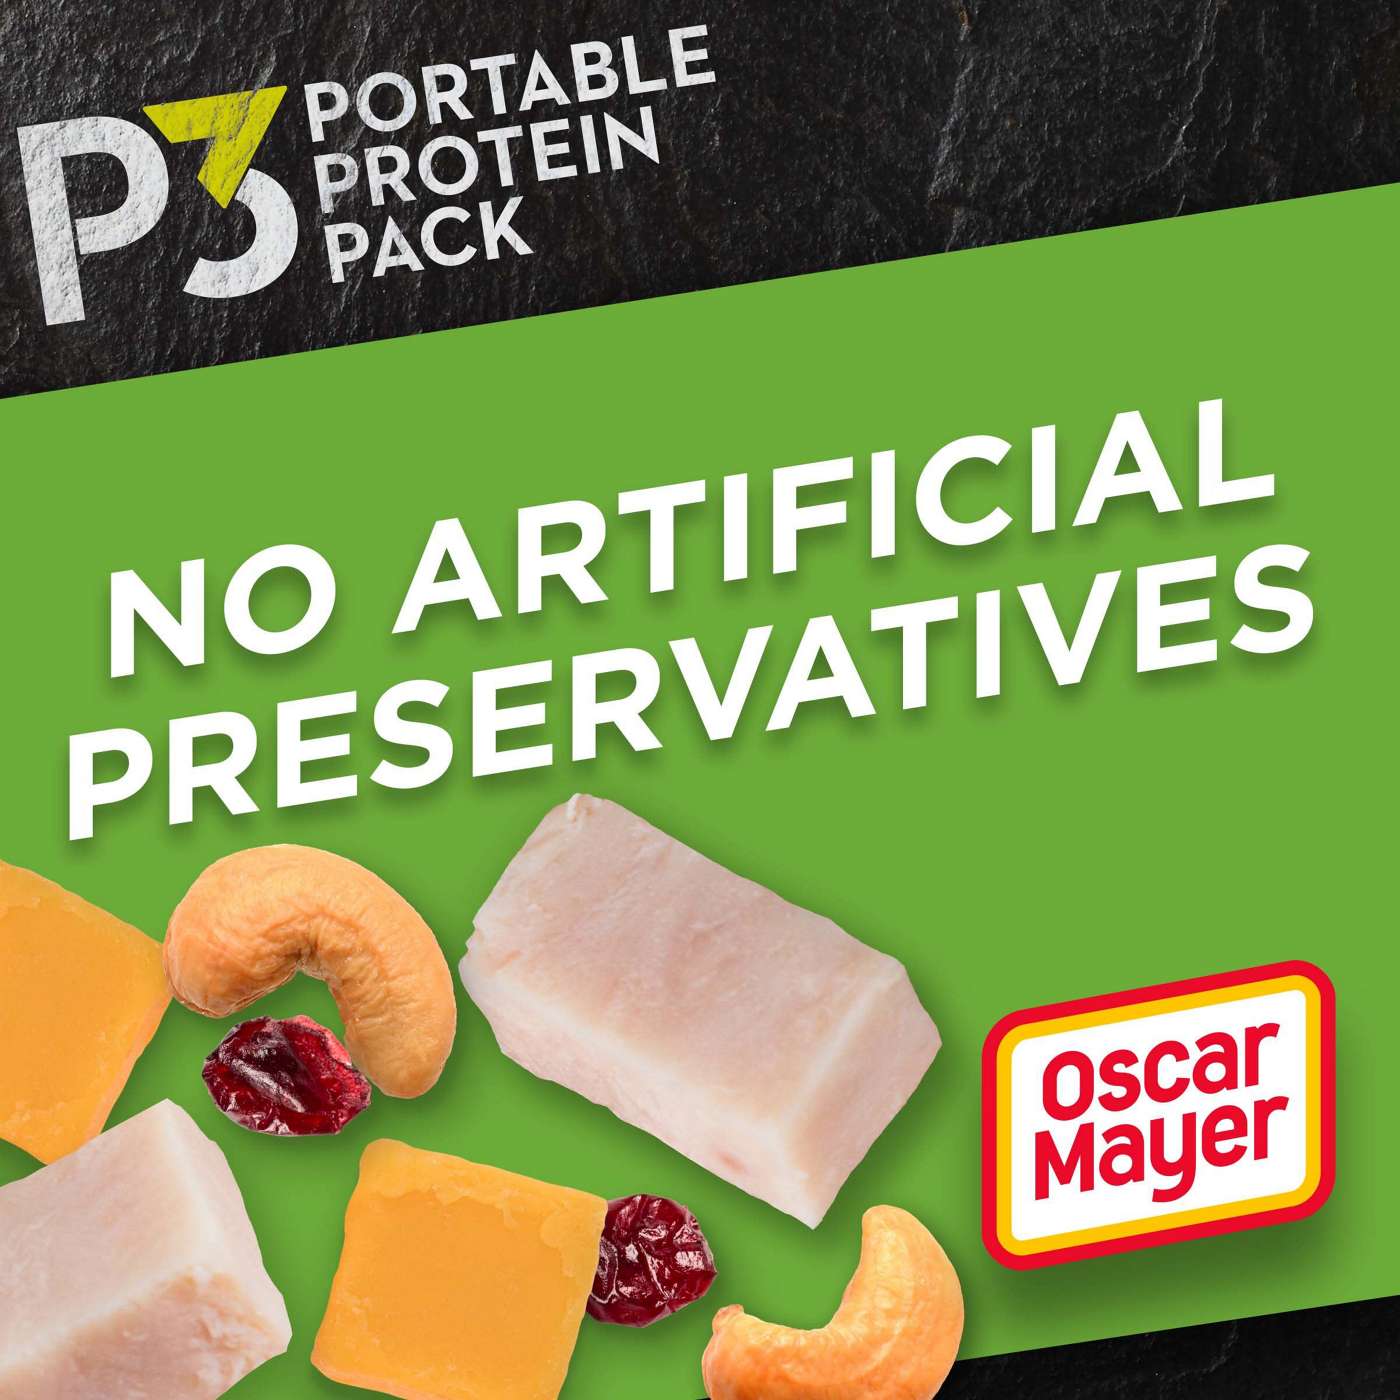 P3 Portable Protein Pack Protein Plates Snack Tray - Turkey, Cashews, Cheddar & Cranberries; image 3 of 4